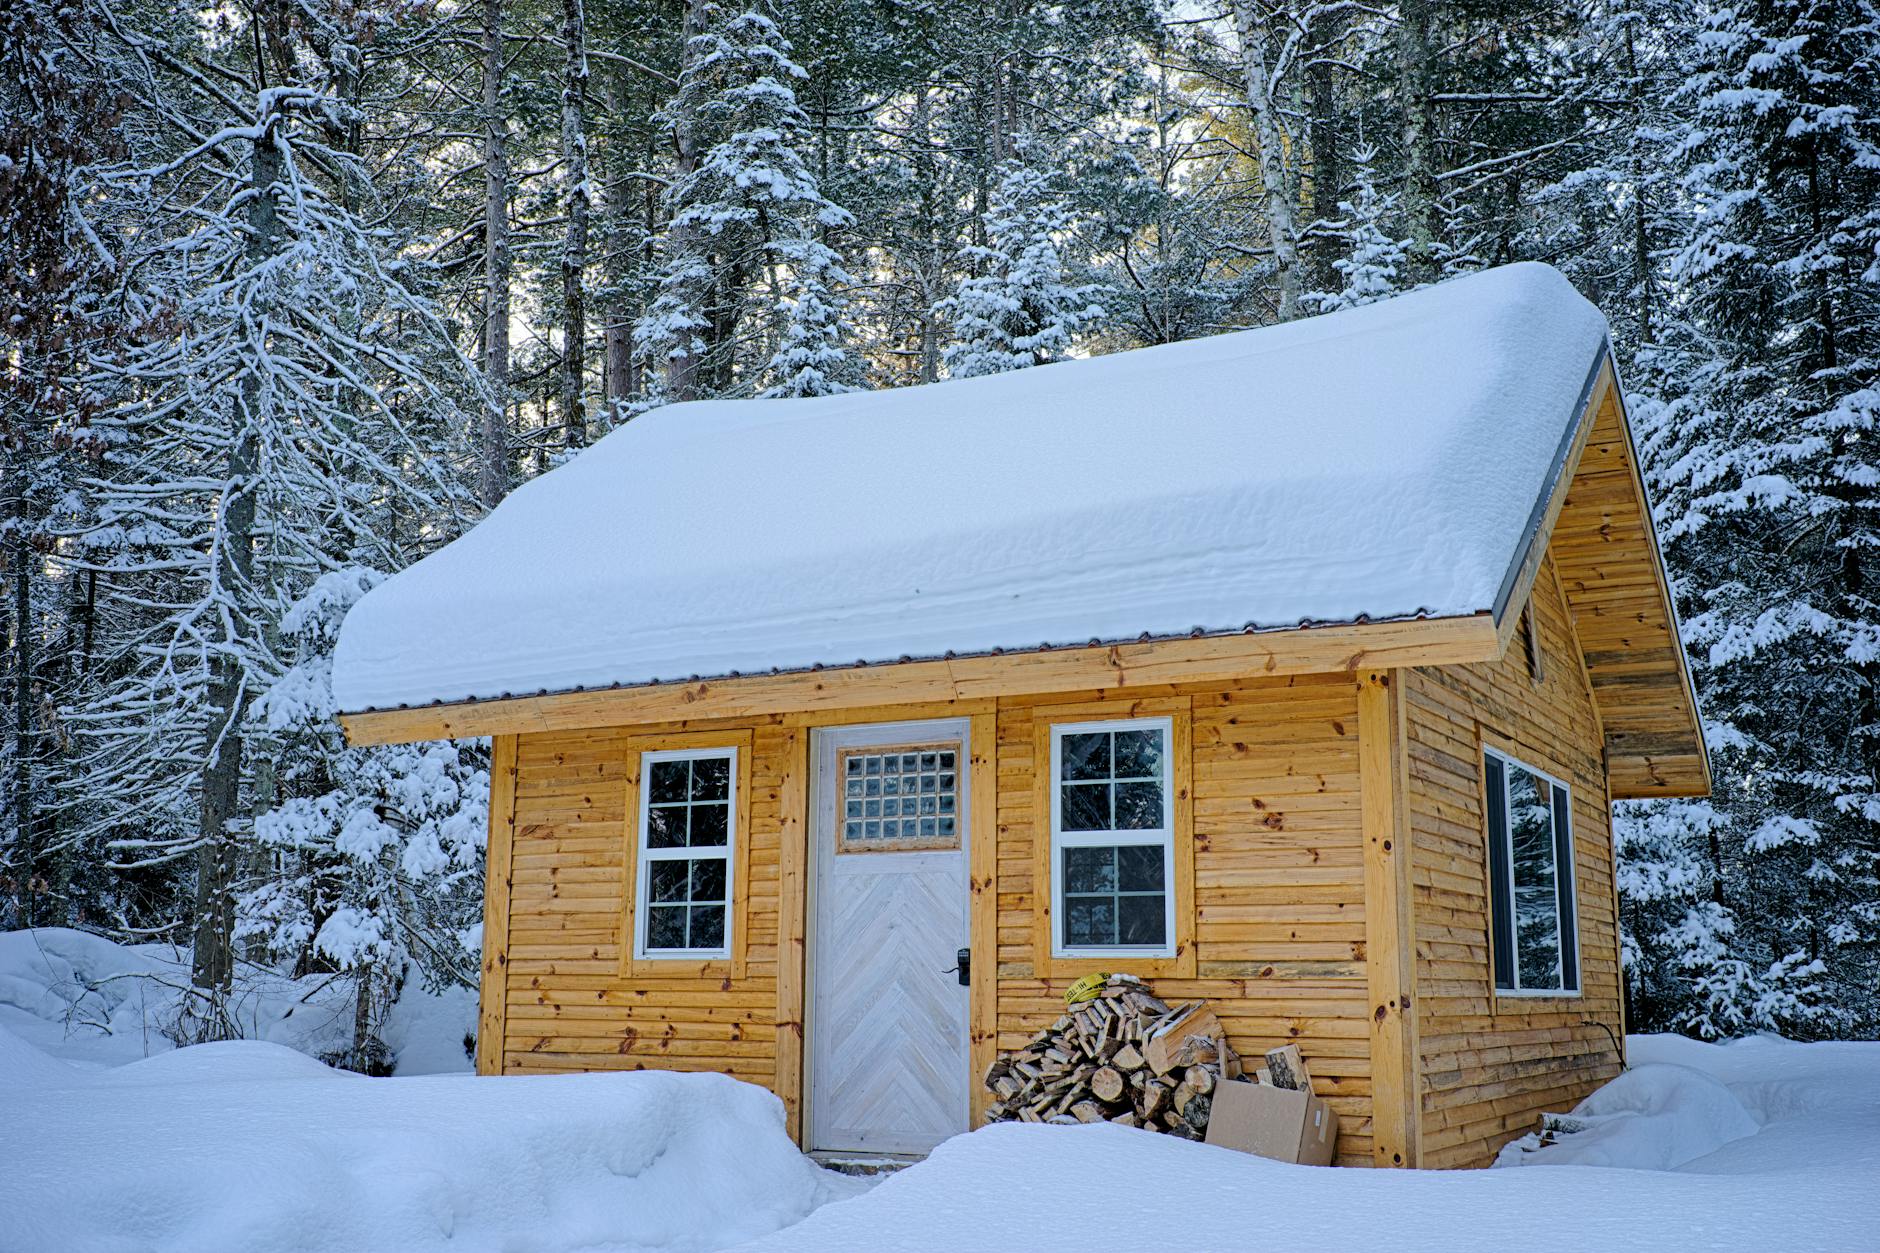 Snow covered wooden house inside forest